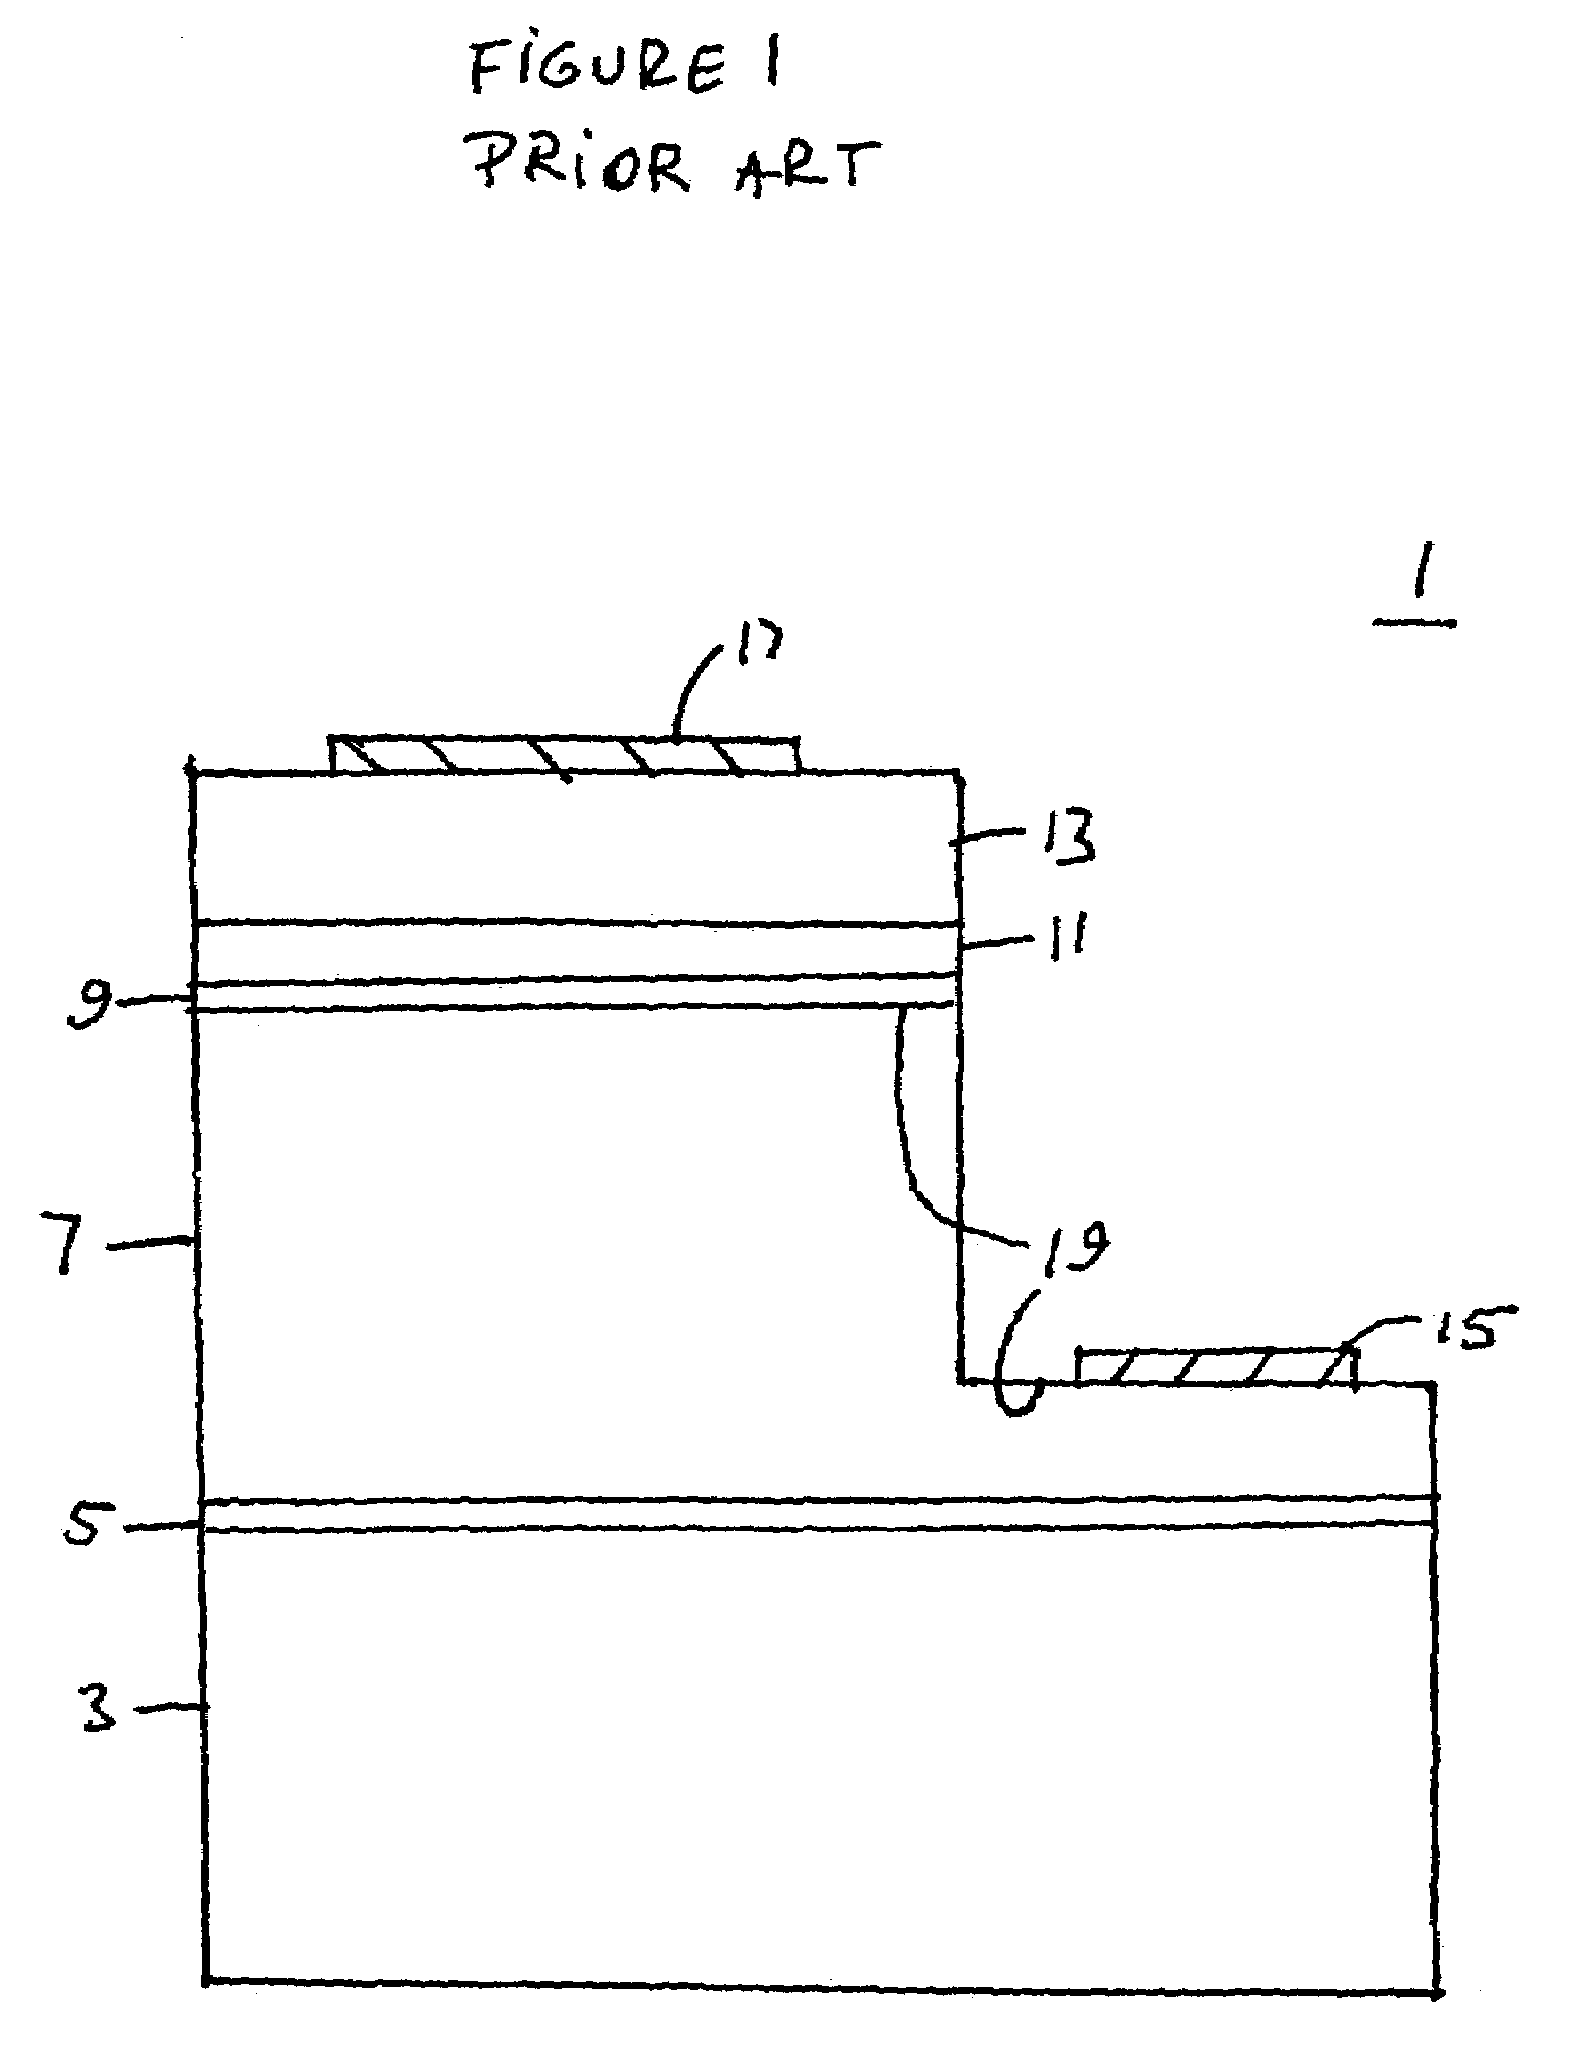 Solid state lighting device with reduced form factor including LED with directional emission and package with microoptics